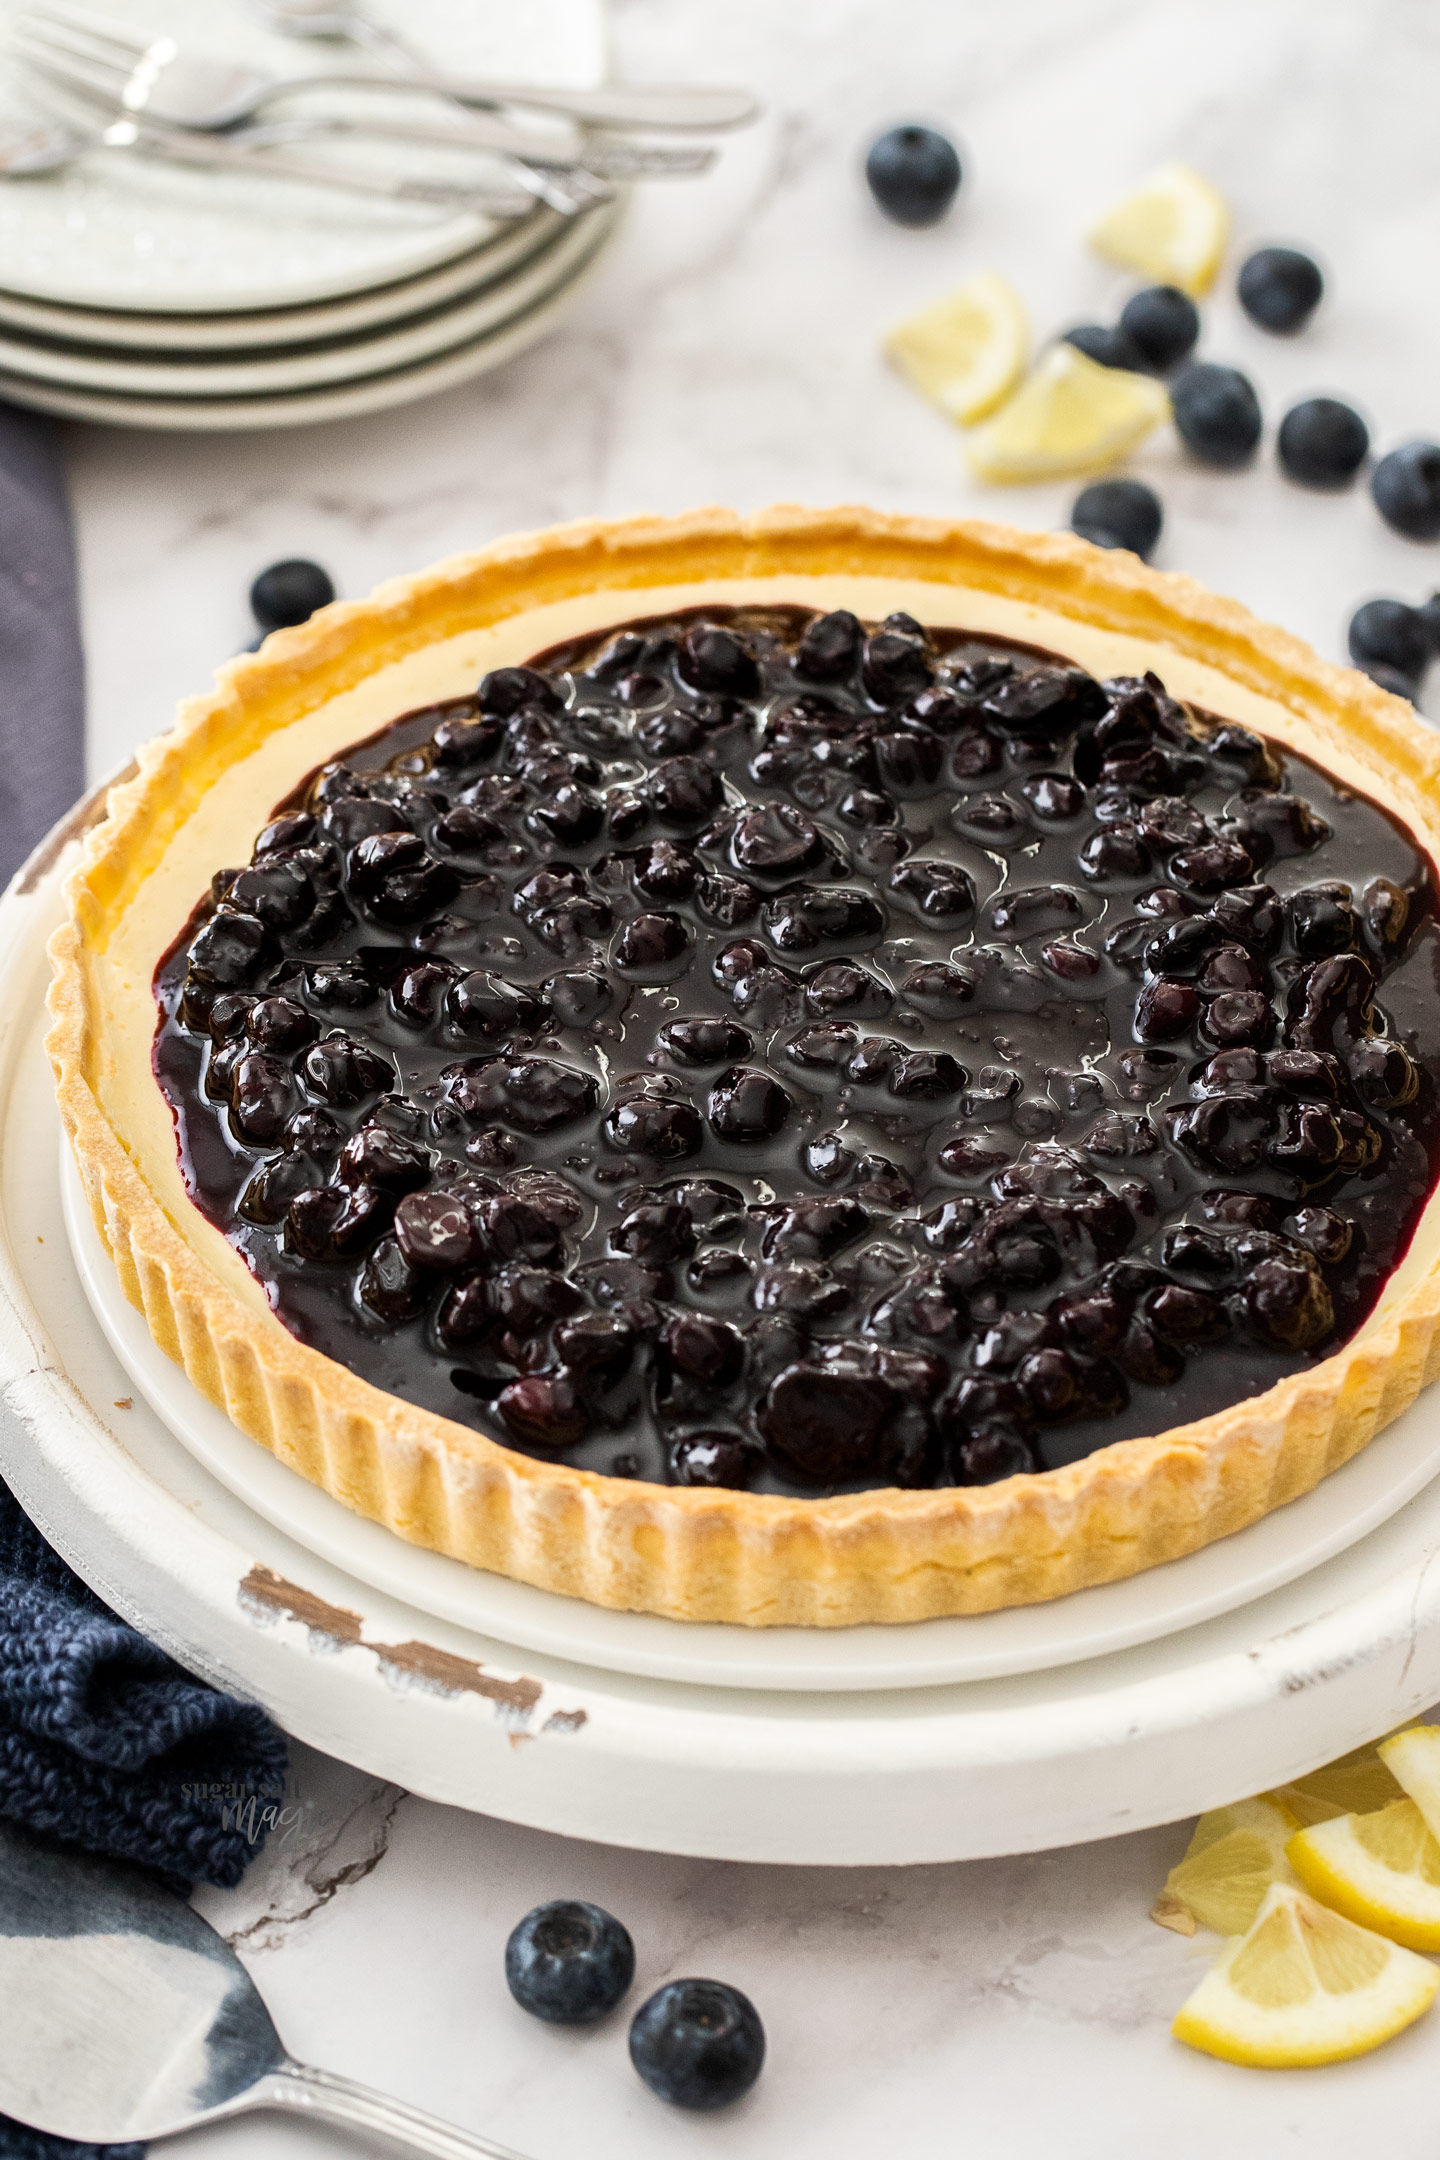 A tart on a platter, topped with blueberry sauce.